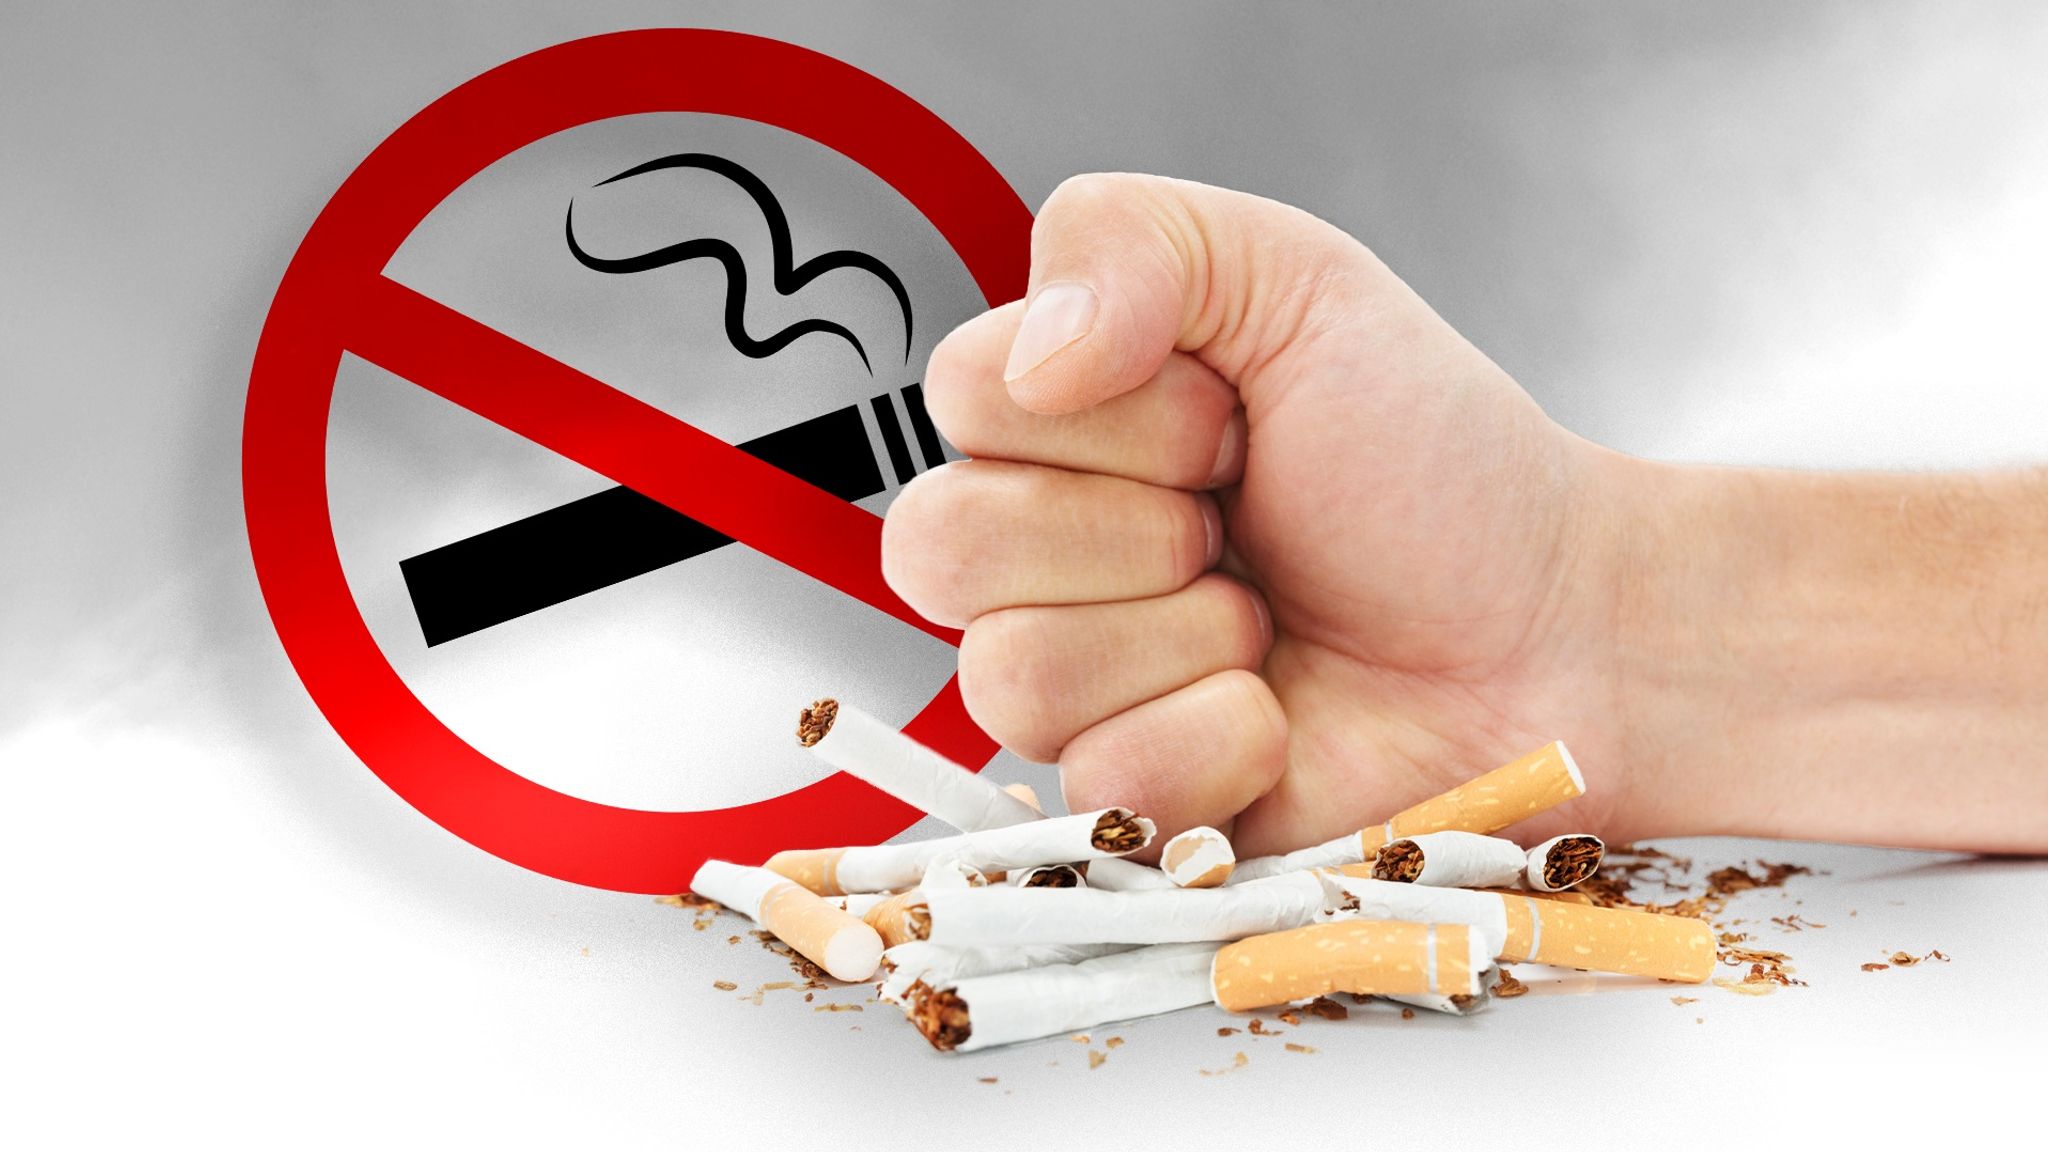 Tobacco products ban: 100 rupees fine for smoking in Kathmandu